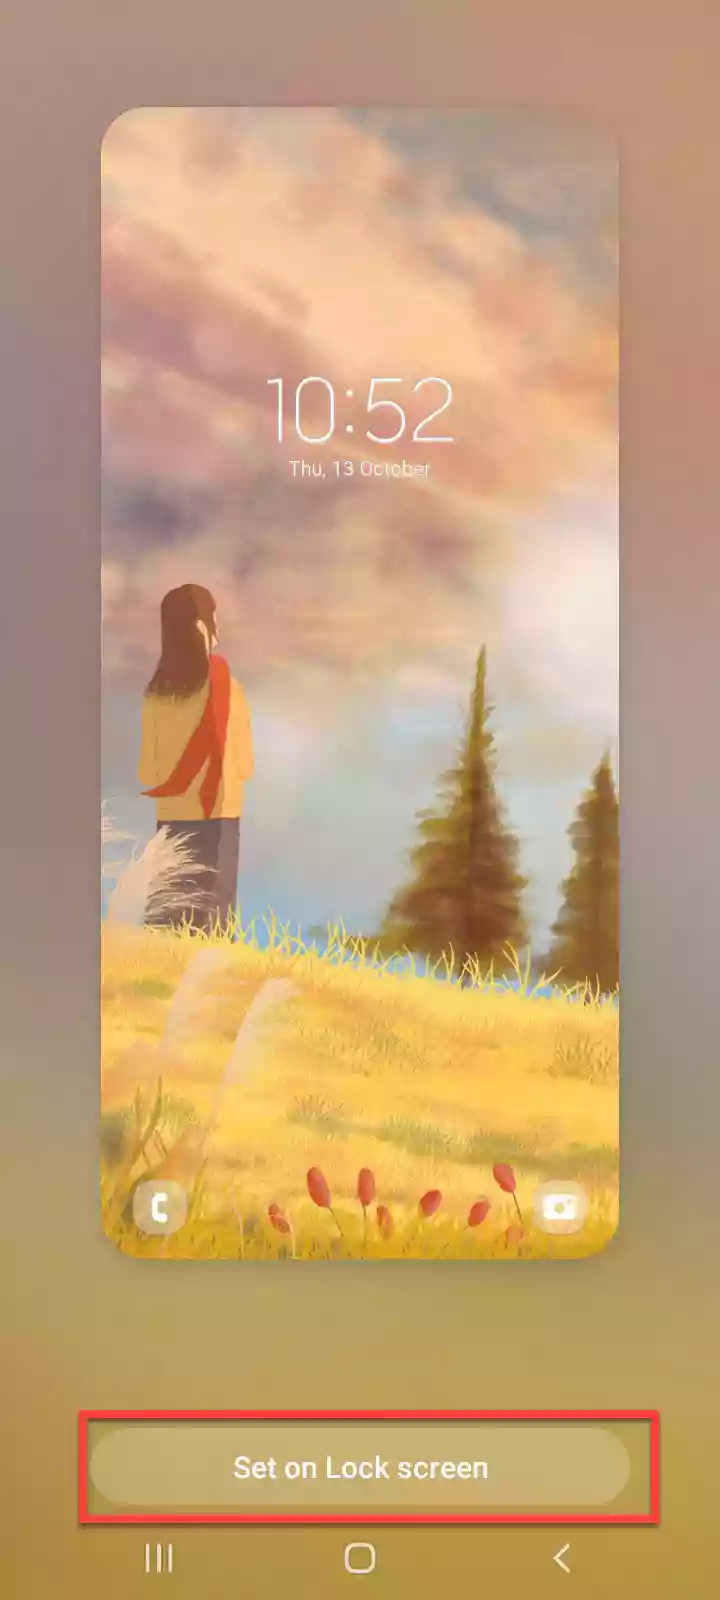 Set the video as your S22 Live wallpaper